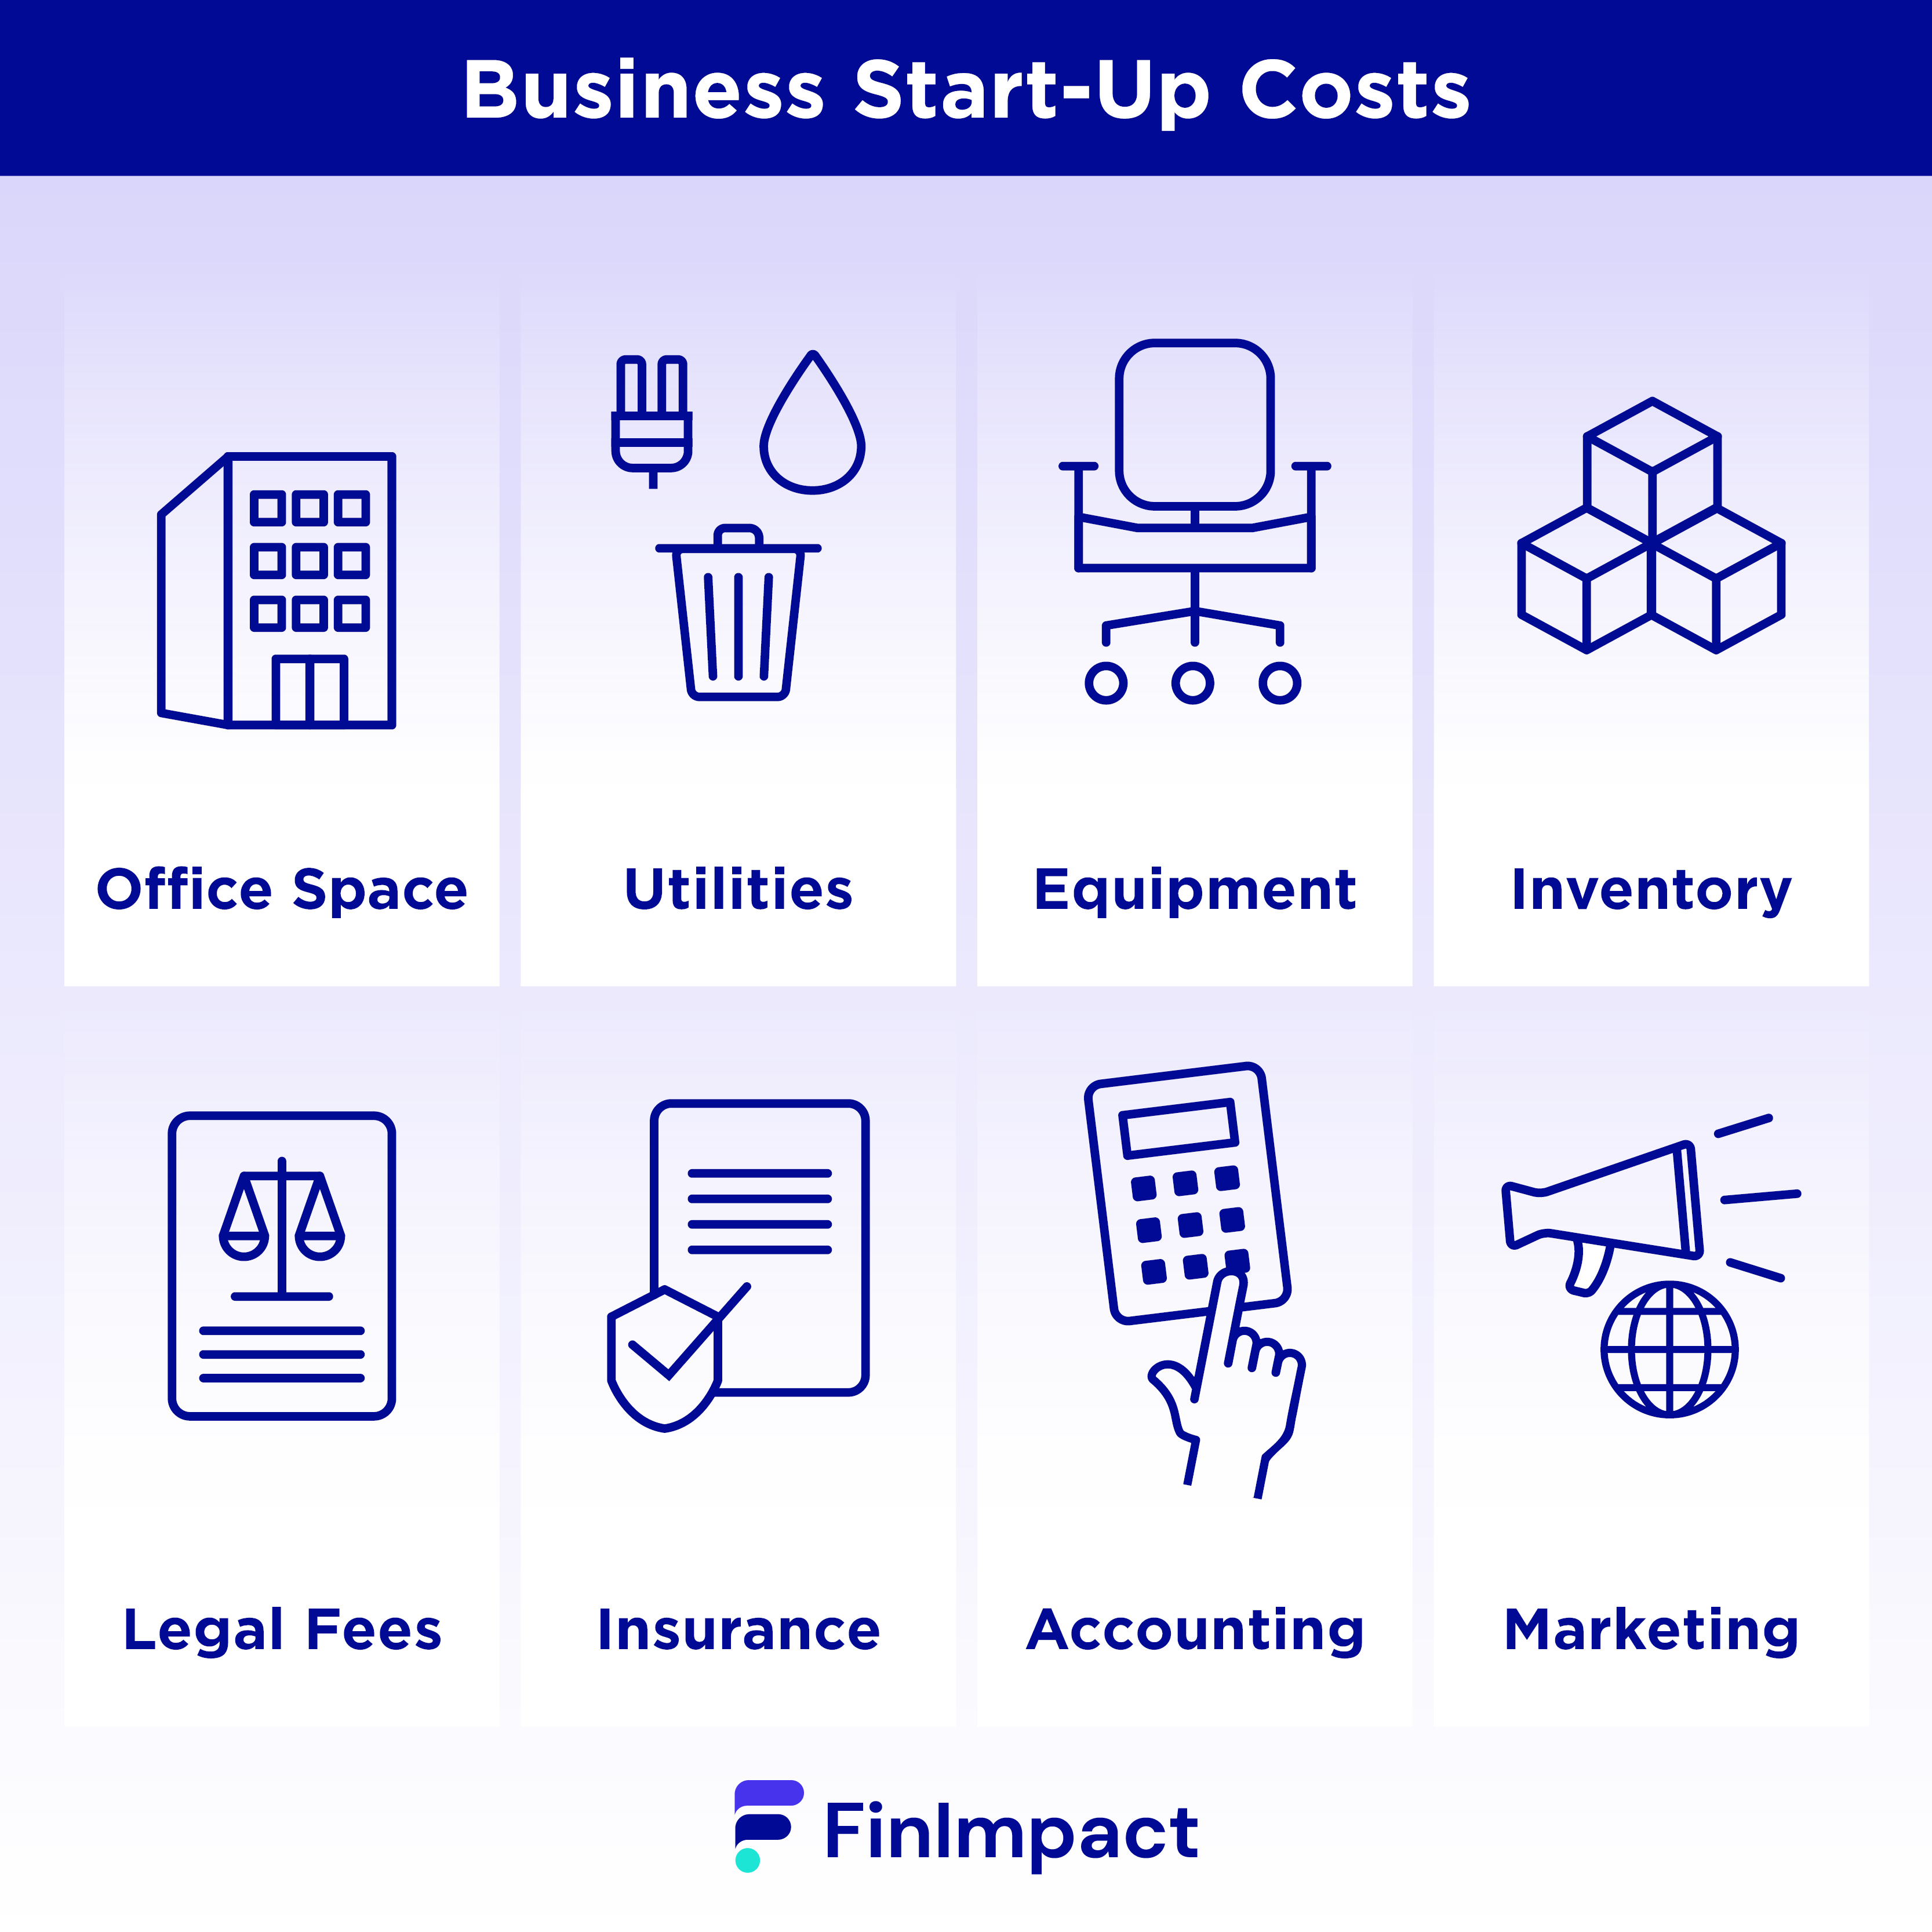 business startup costs